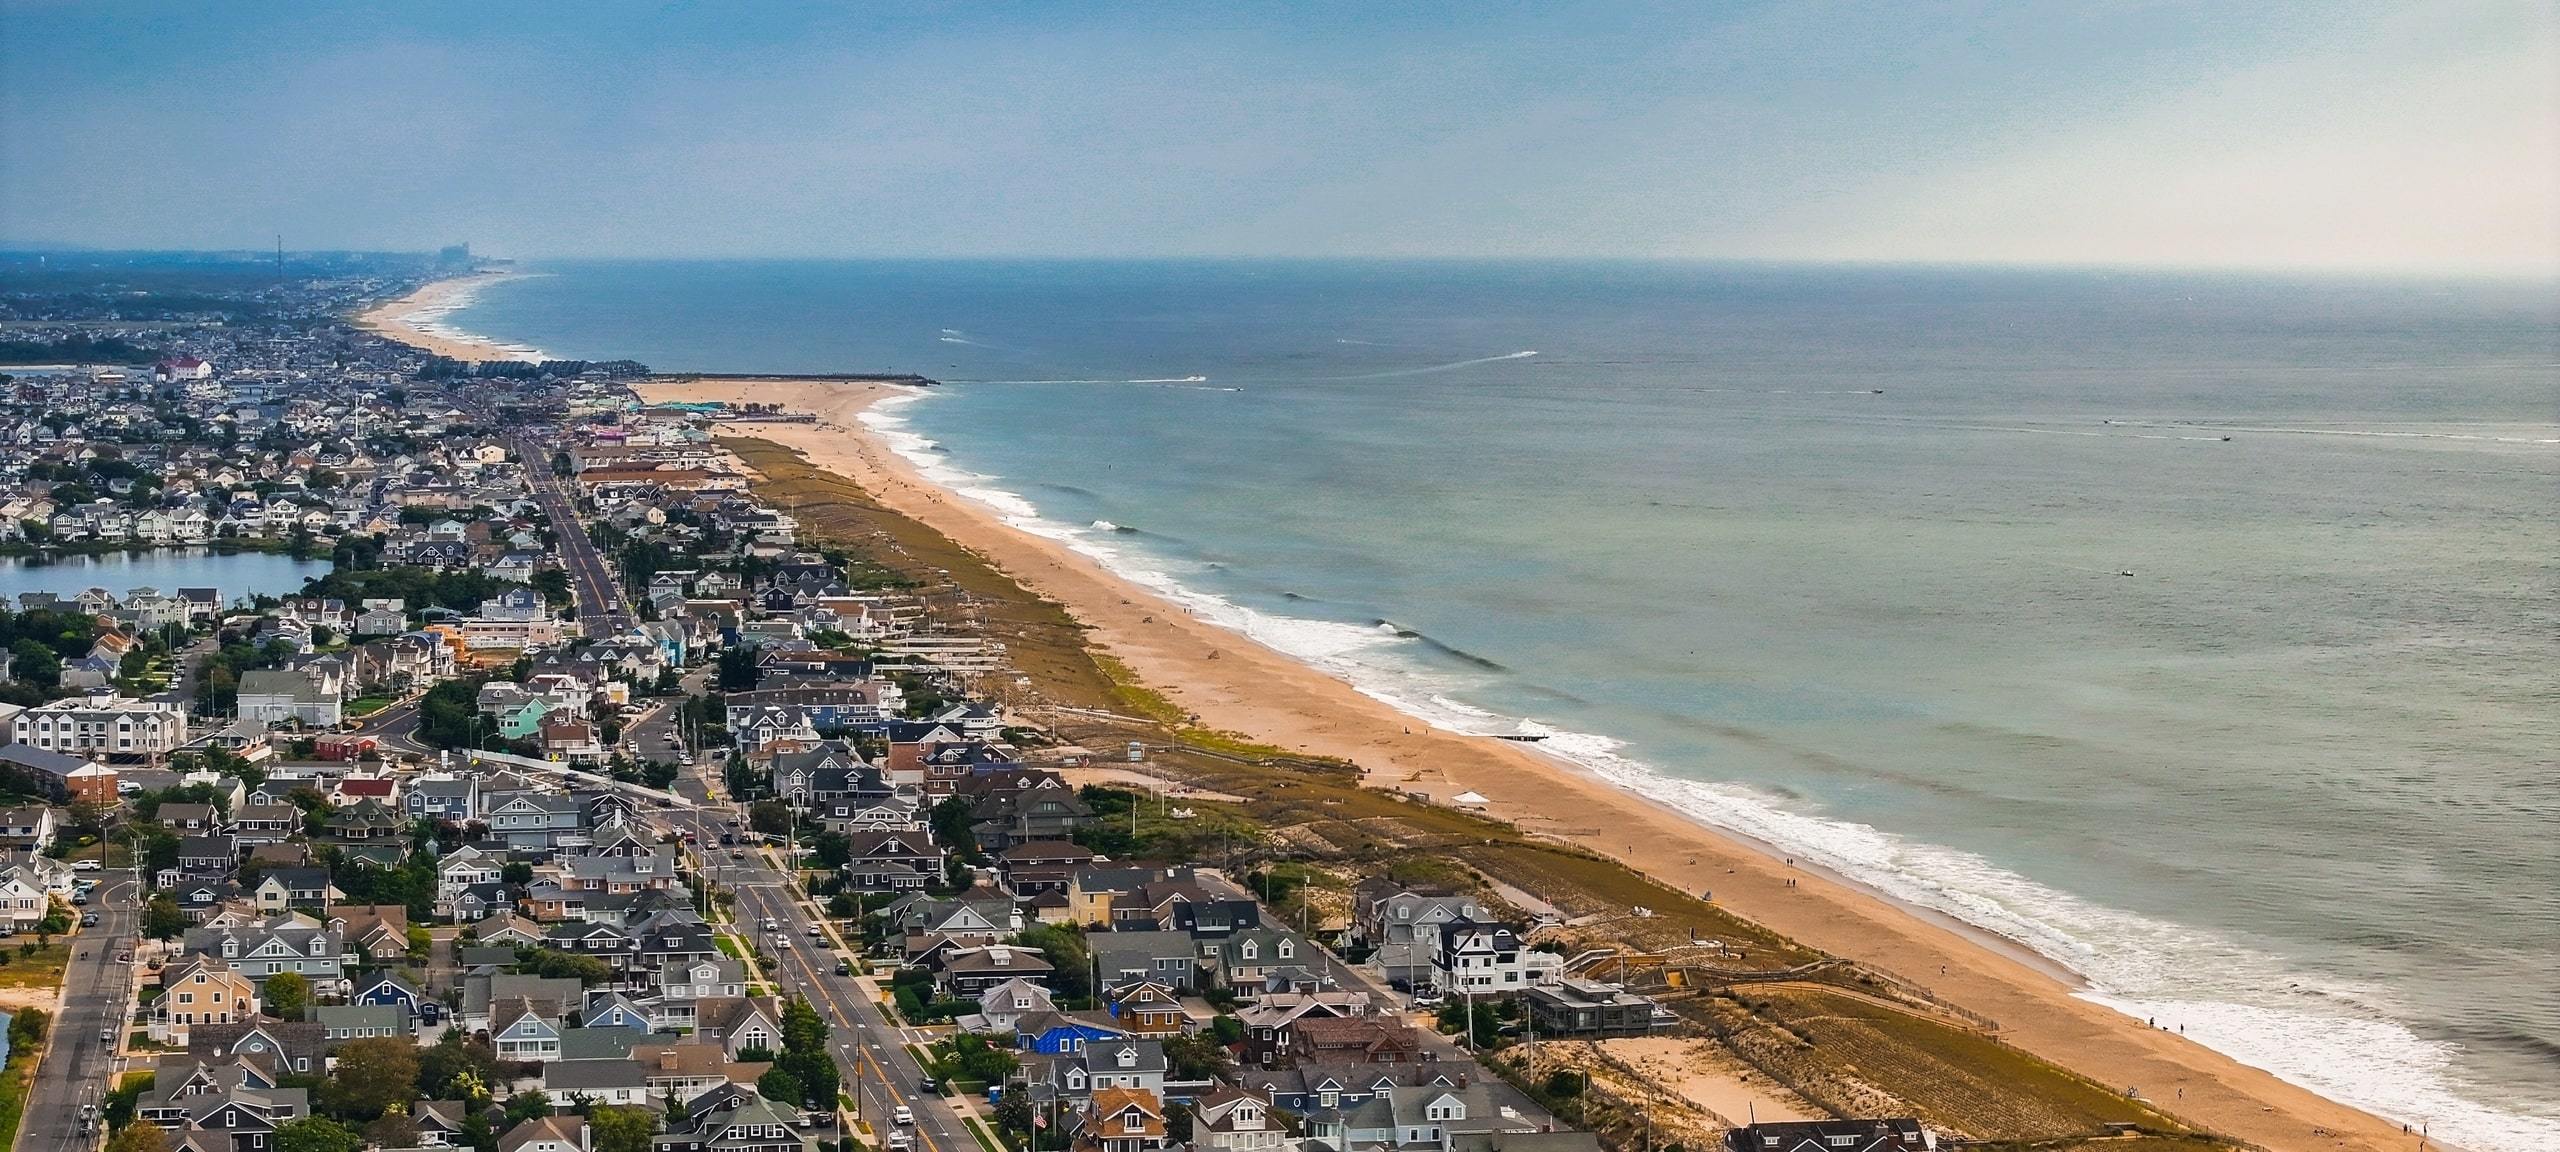 Aerial view of beach at Bay Head, NJ during summertime